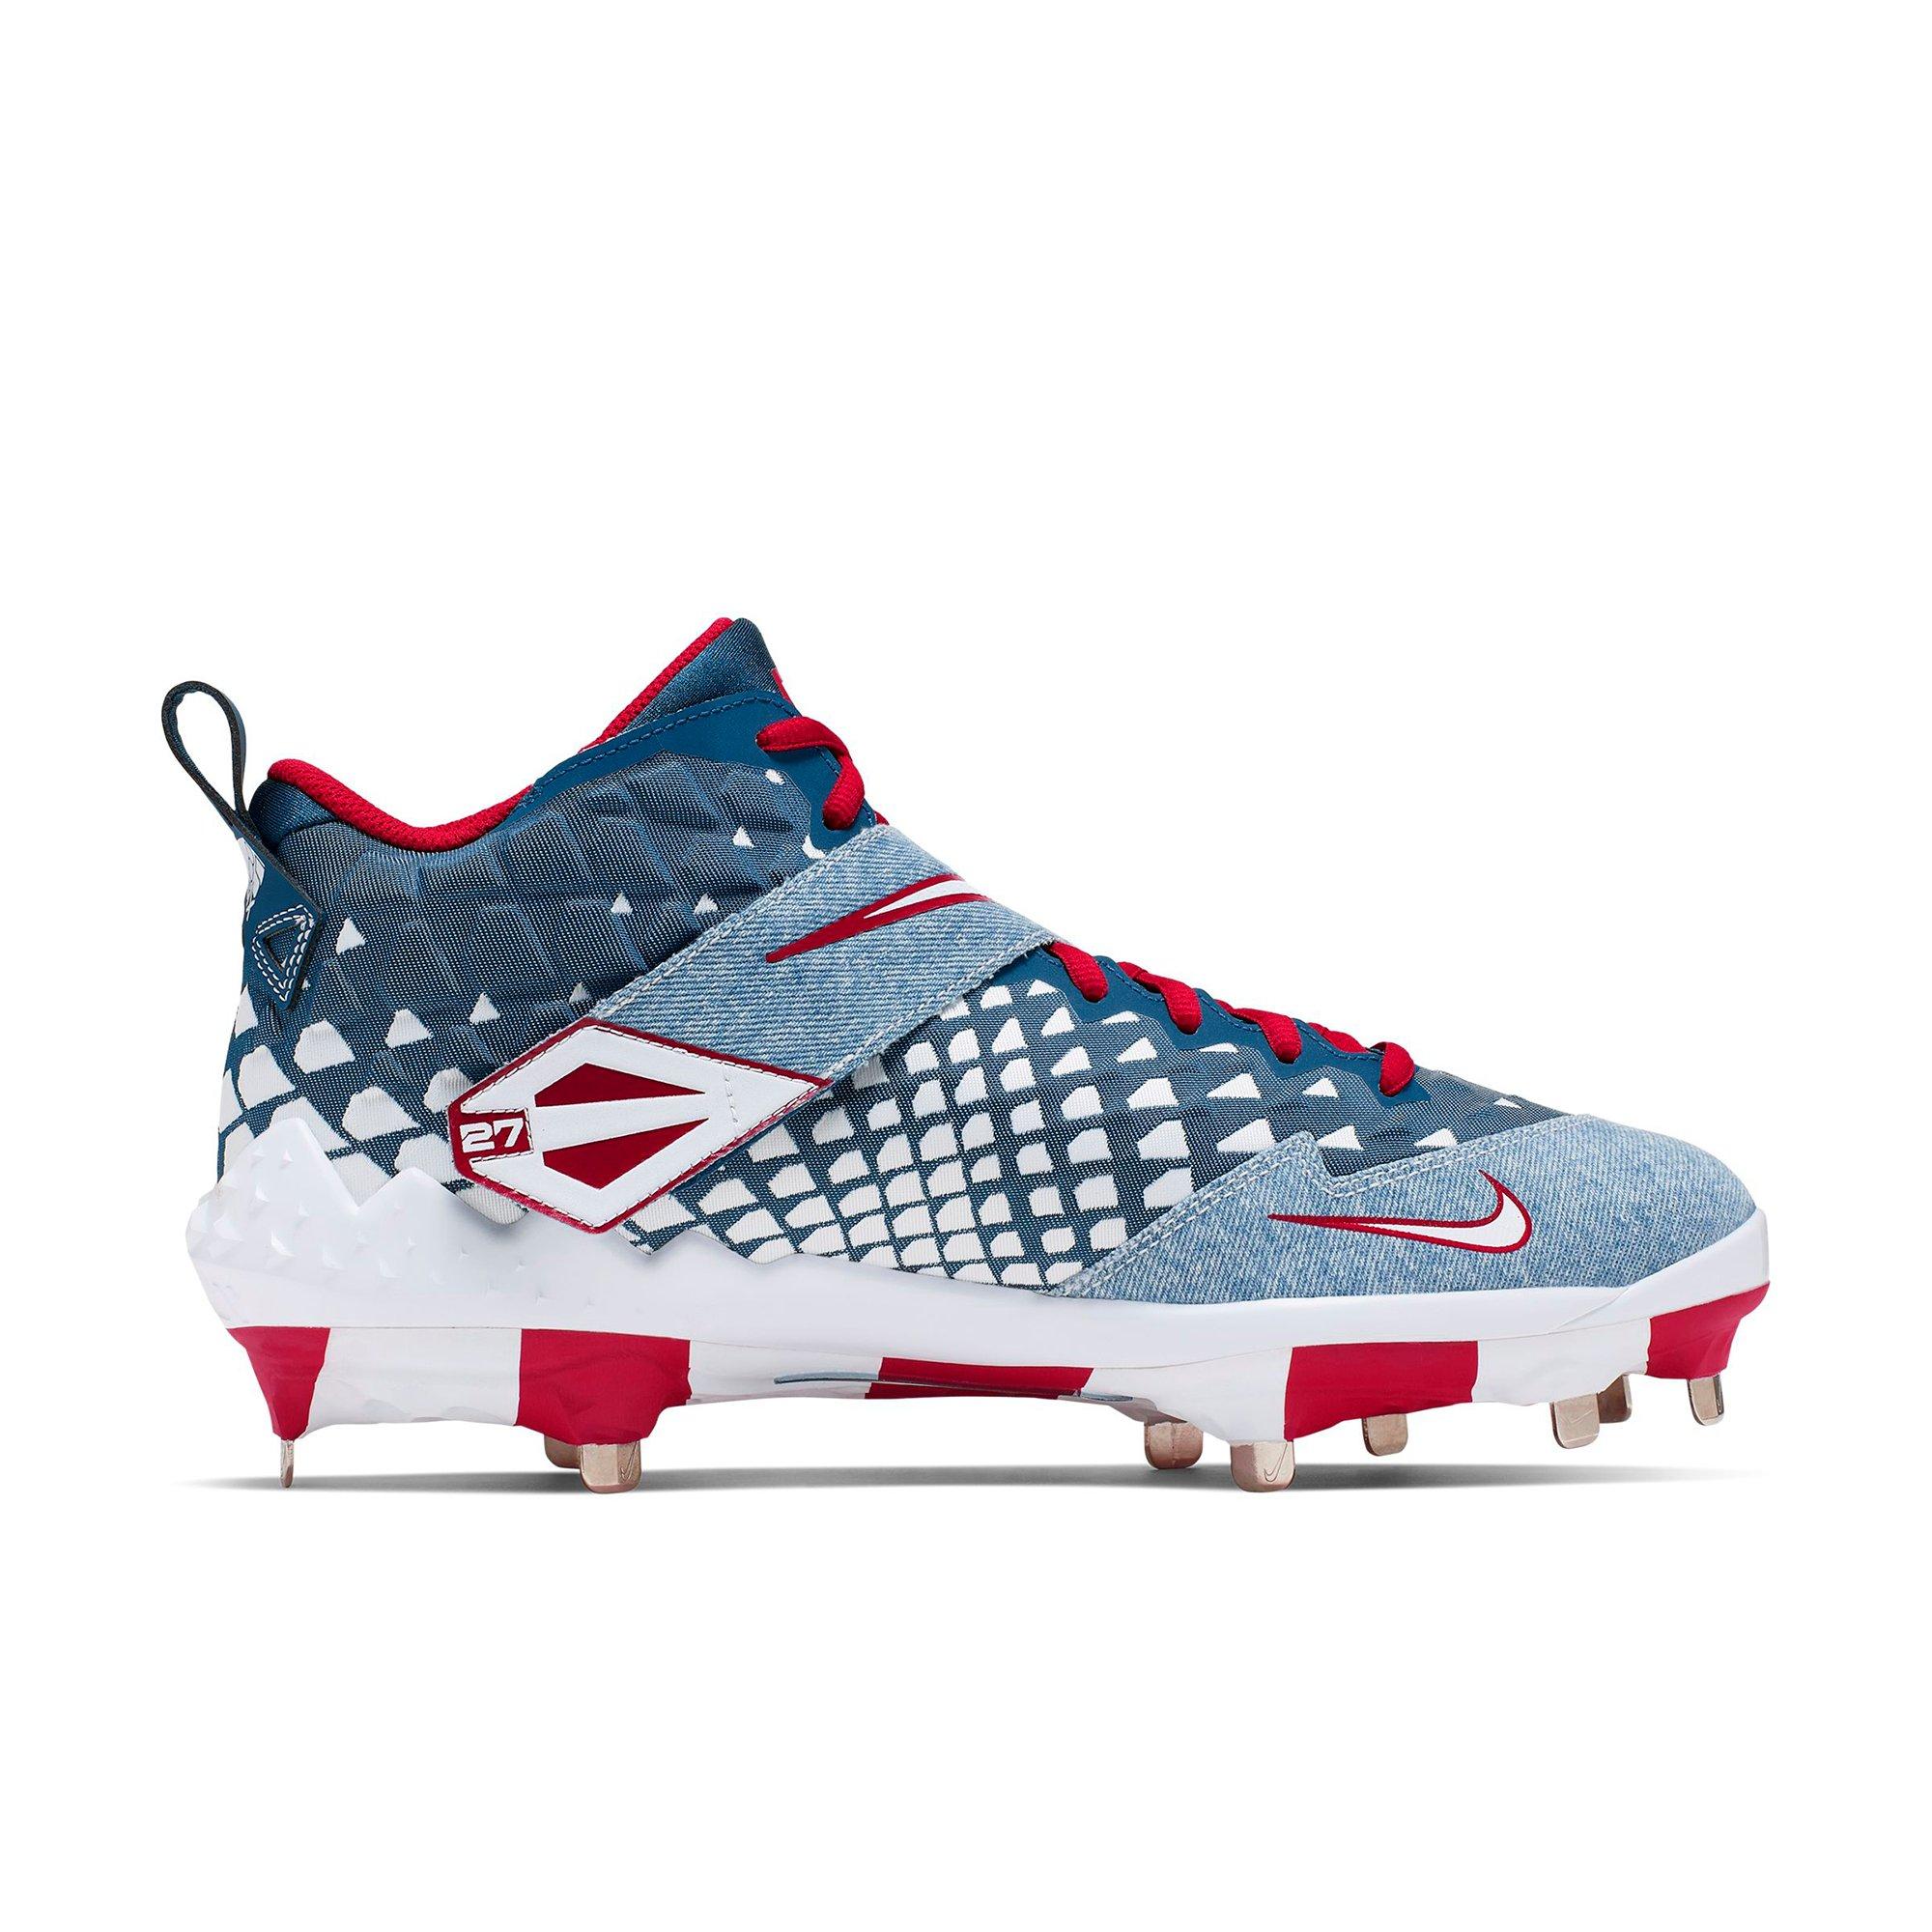 mike trout cleats molded